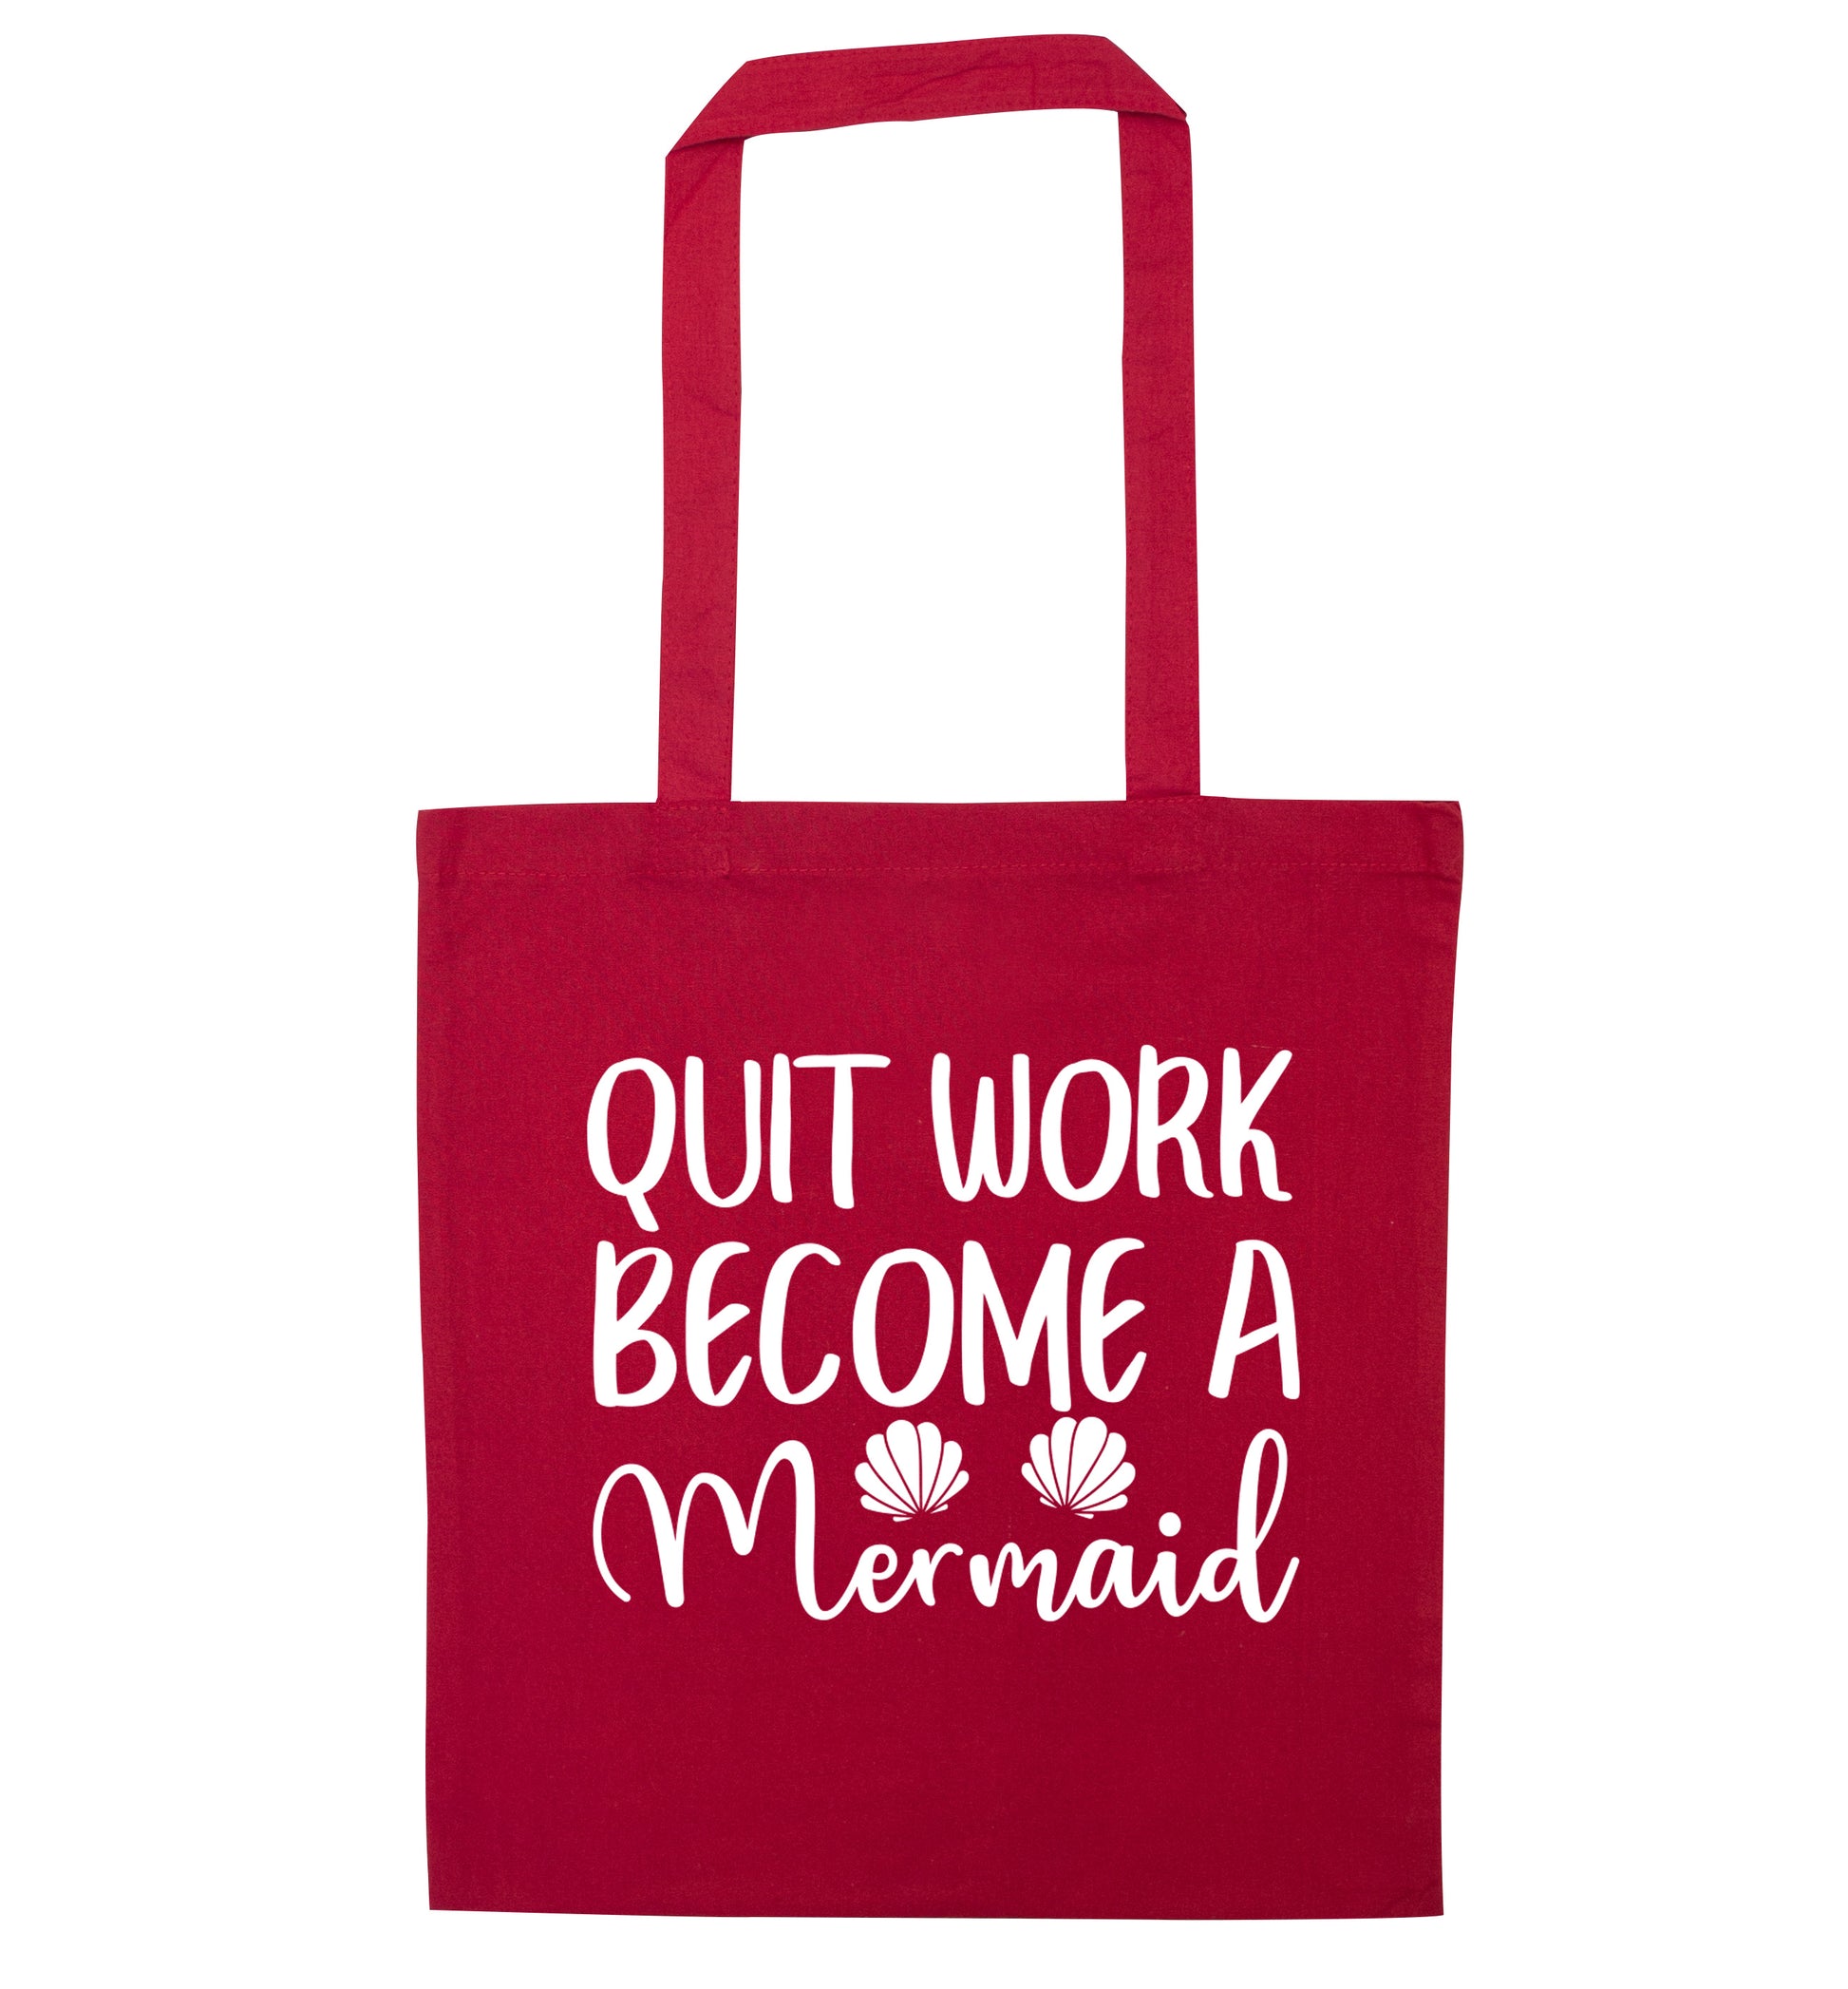 Quit work become a mermaid red tote bag